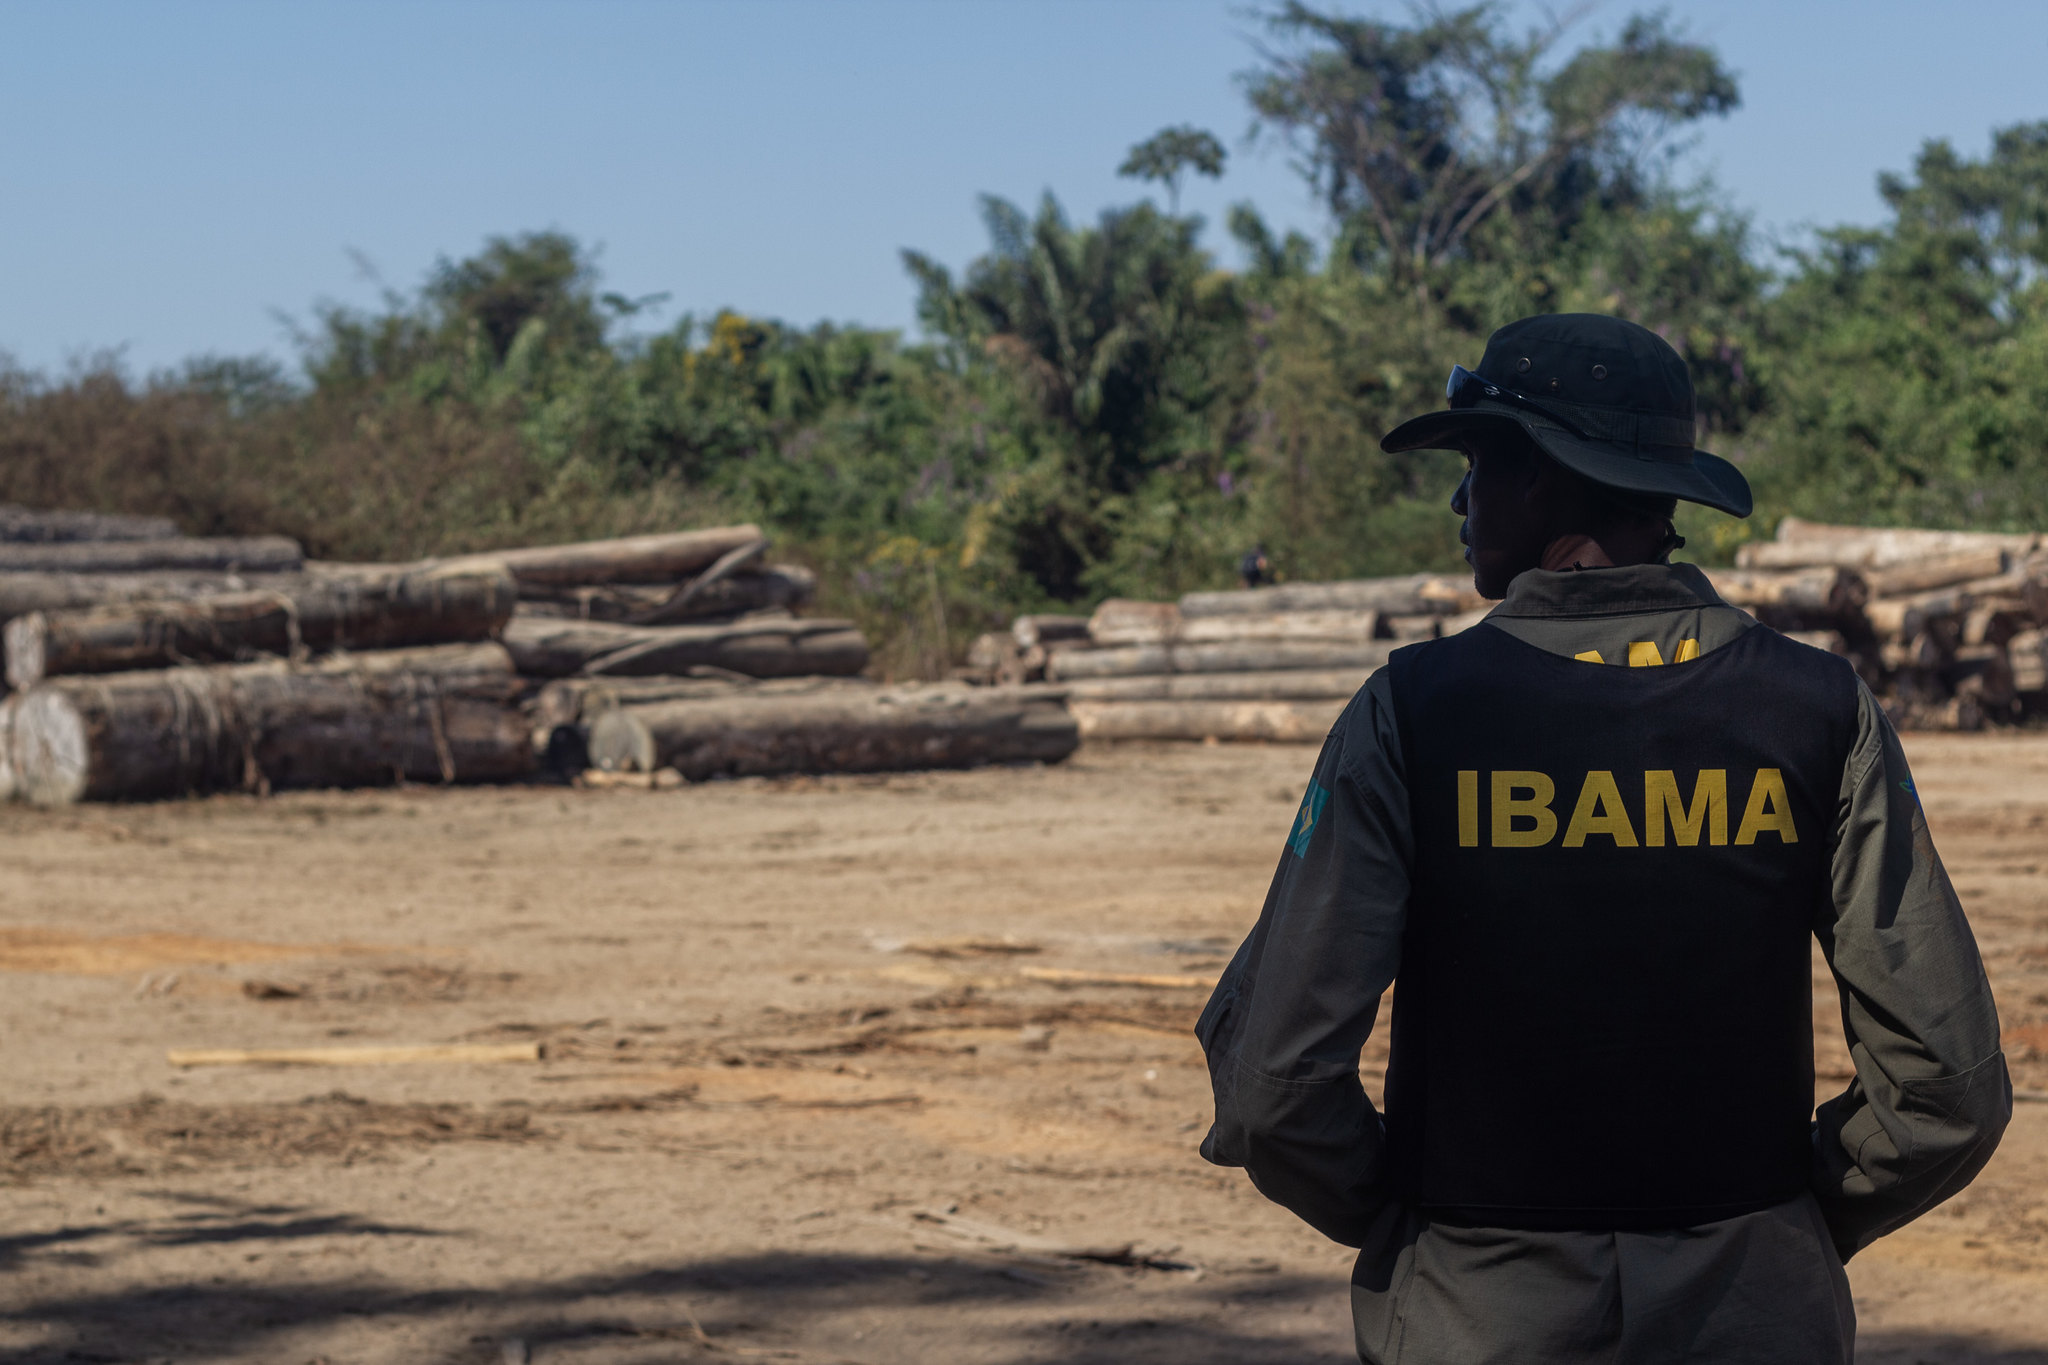 Ibama inspectors inspecting a project in the Amazon.